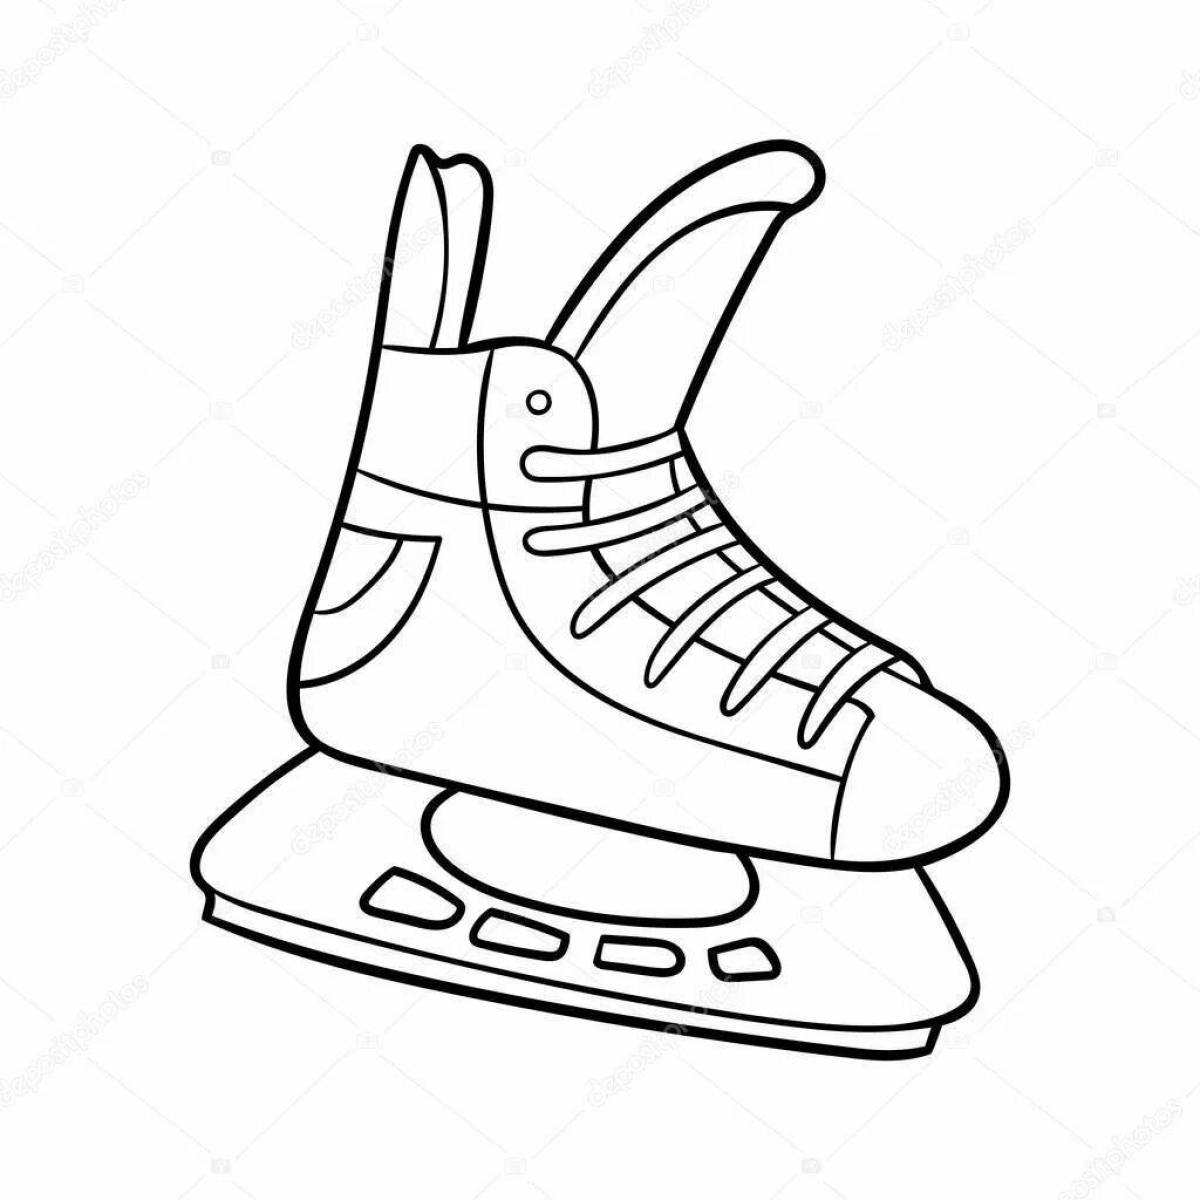 Shiny skates for 3-4 year olds